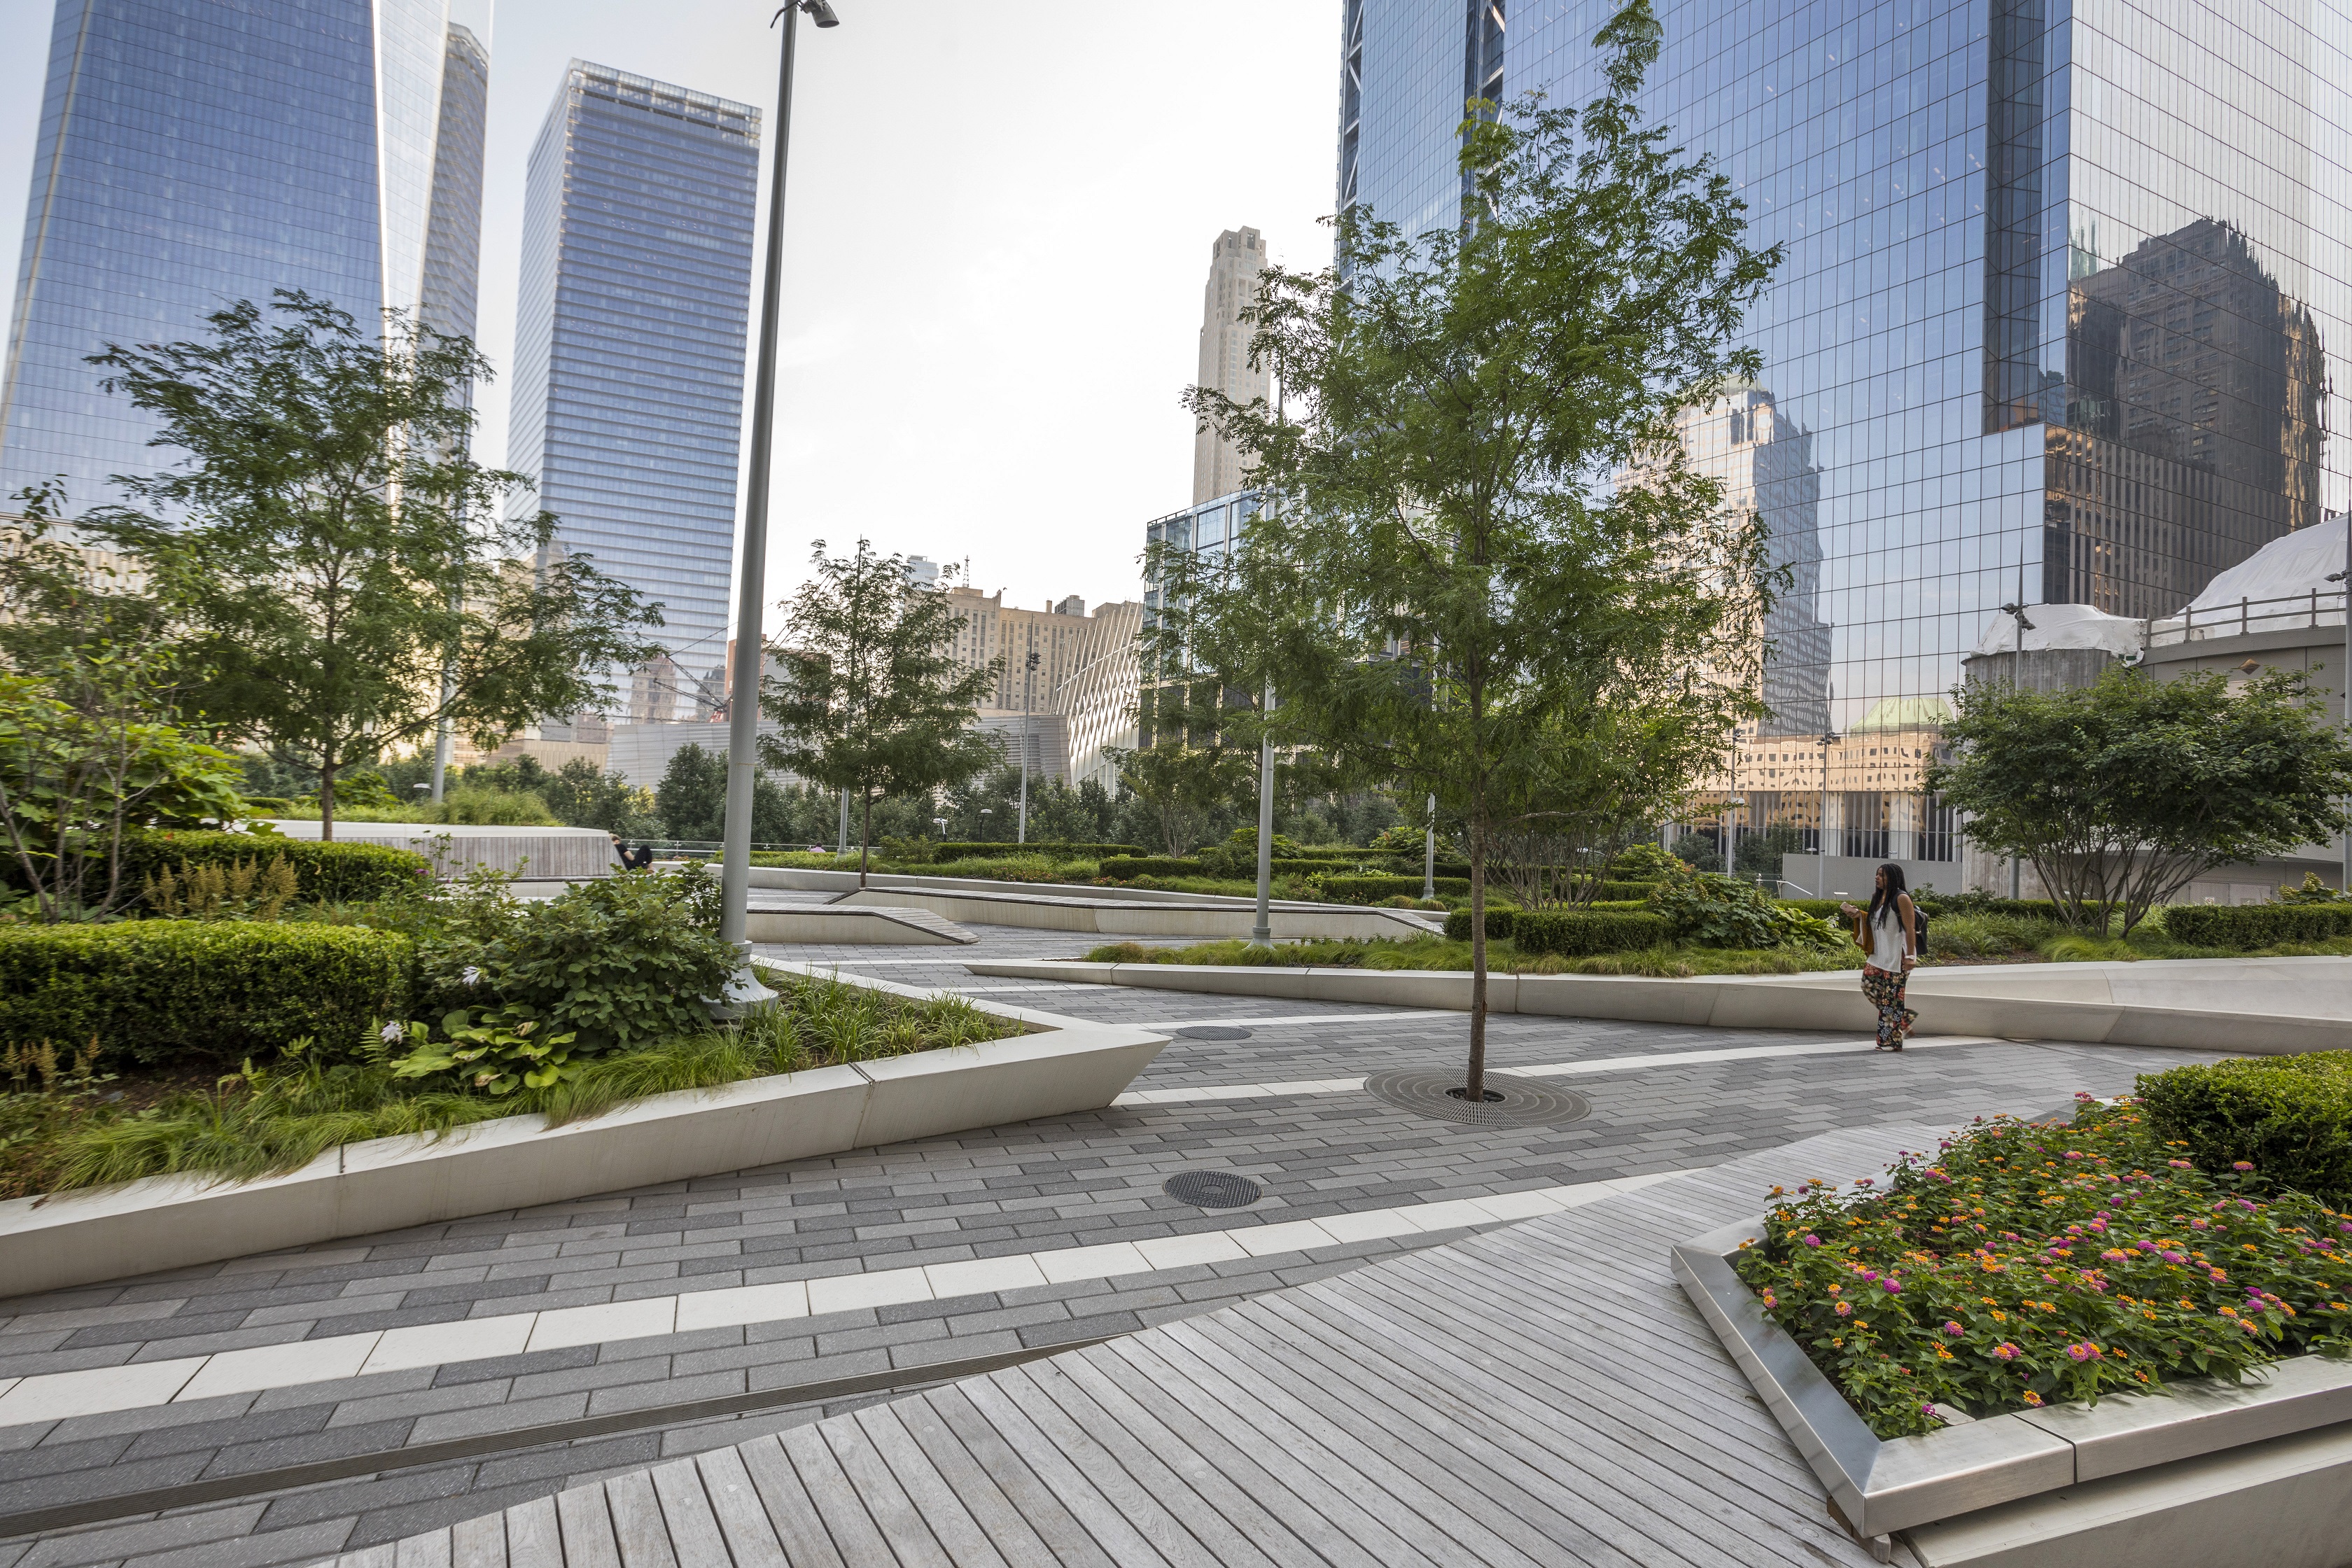 The sharp angles and clean lines cutting through this one-acre elevated park encourages passersby to stop and reflect.